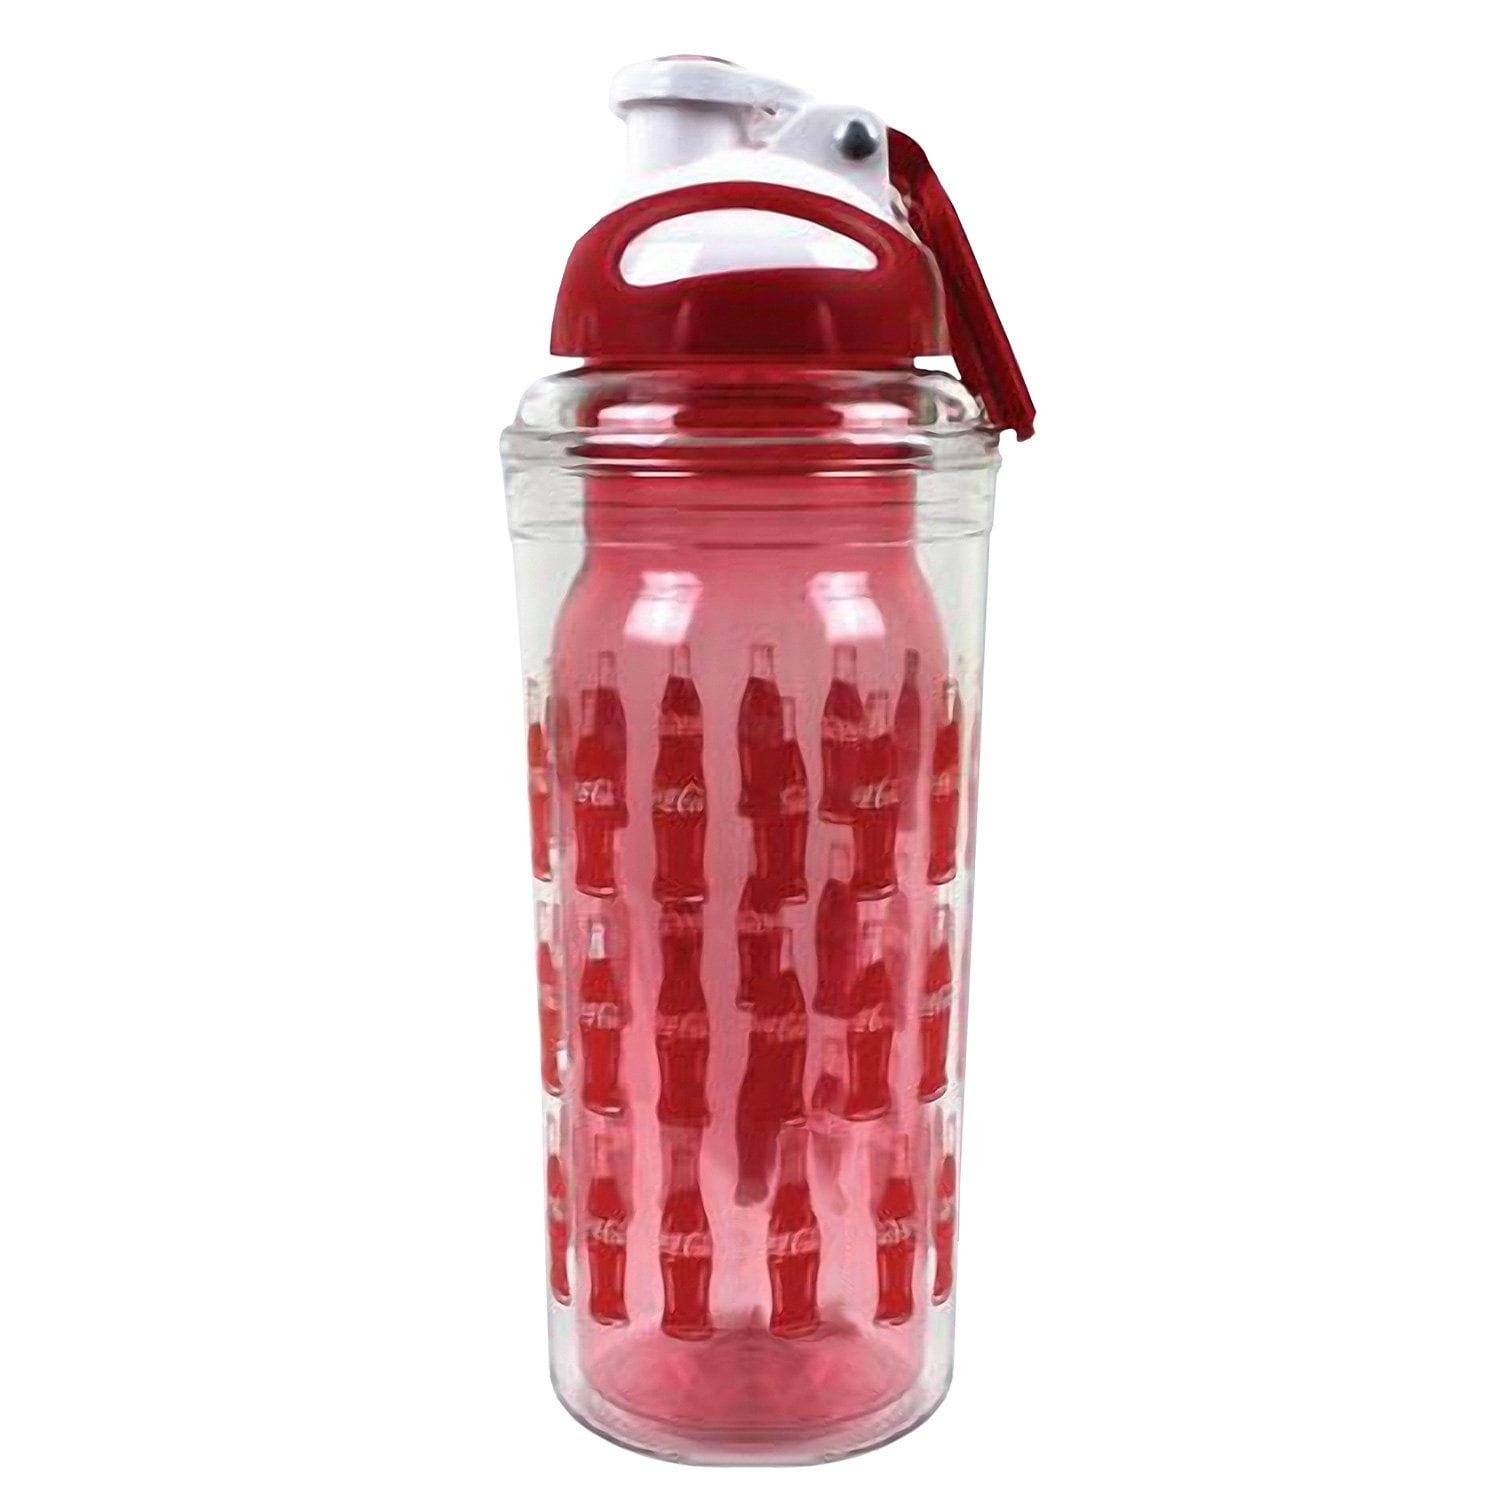 1pc Christmas Themed Insulated Water Bottle With Pop-up Cap, Direct Drinking